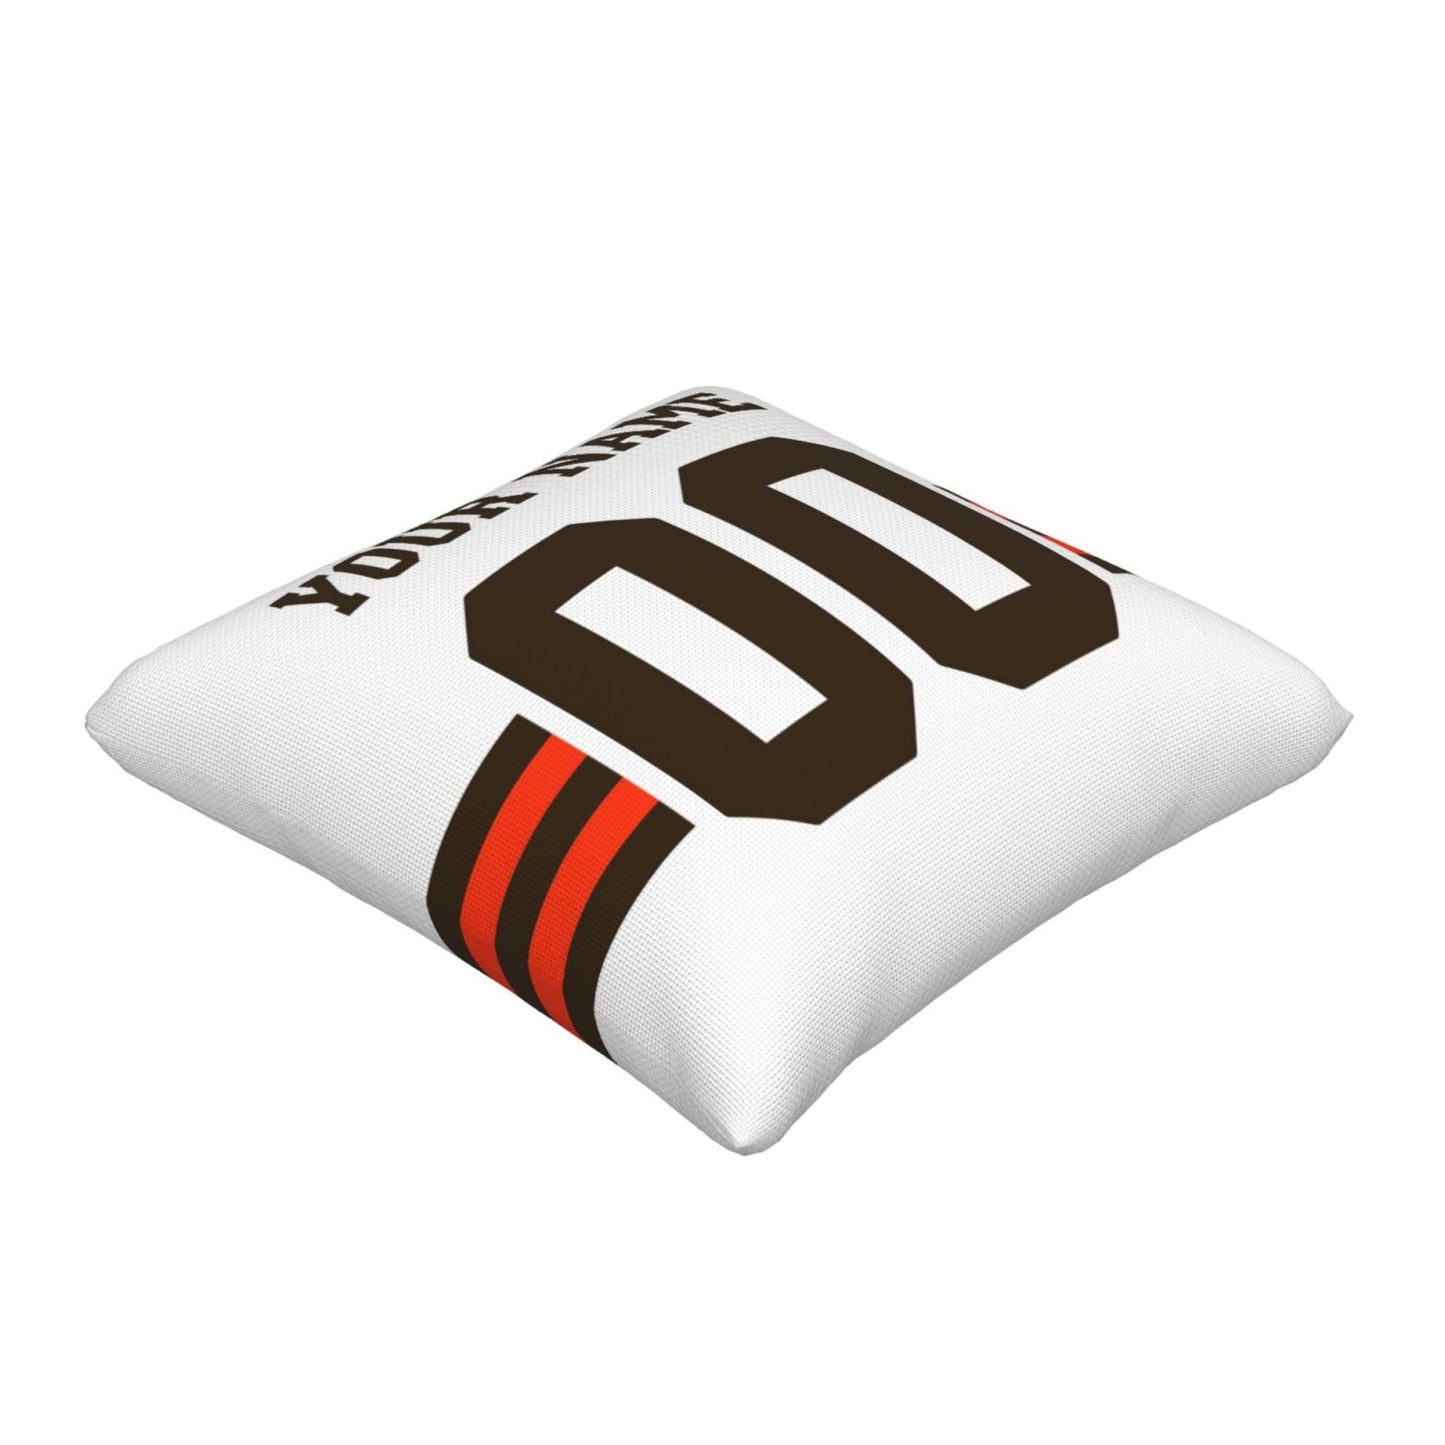 Customized Cleveland Browns Football Team Decorative Throw Pillow Case Print Personalized Football Style Fans Letters & Number White Pillowcase Birthday Gift